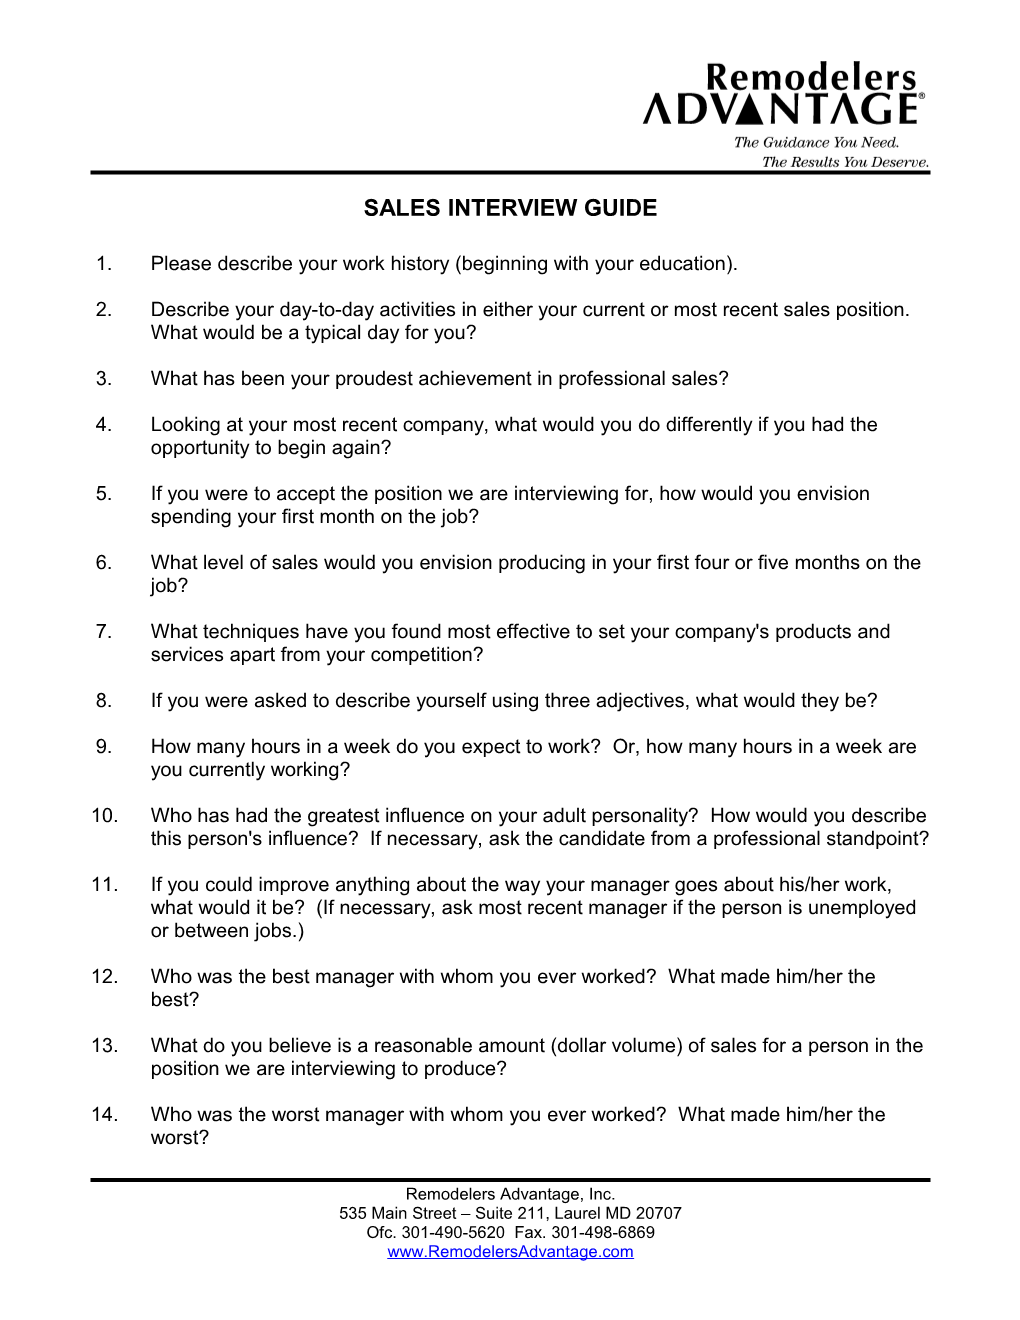 Sales Interview Guide